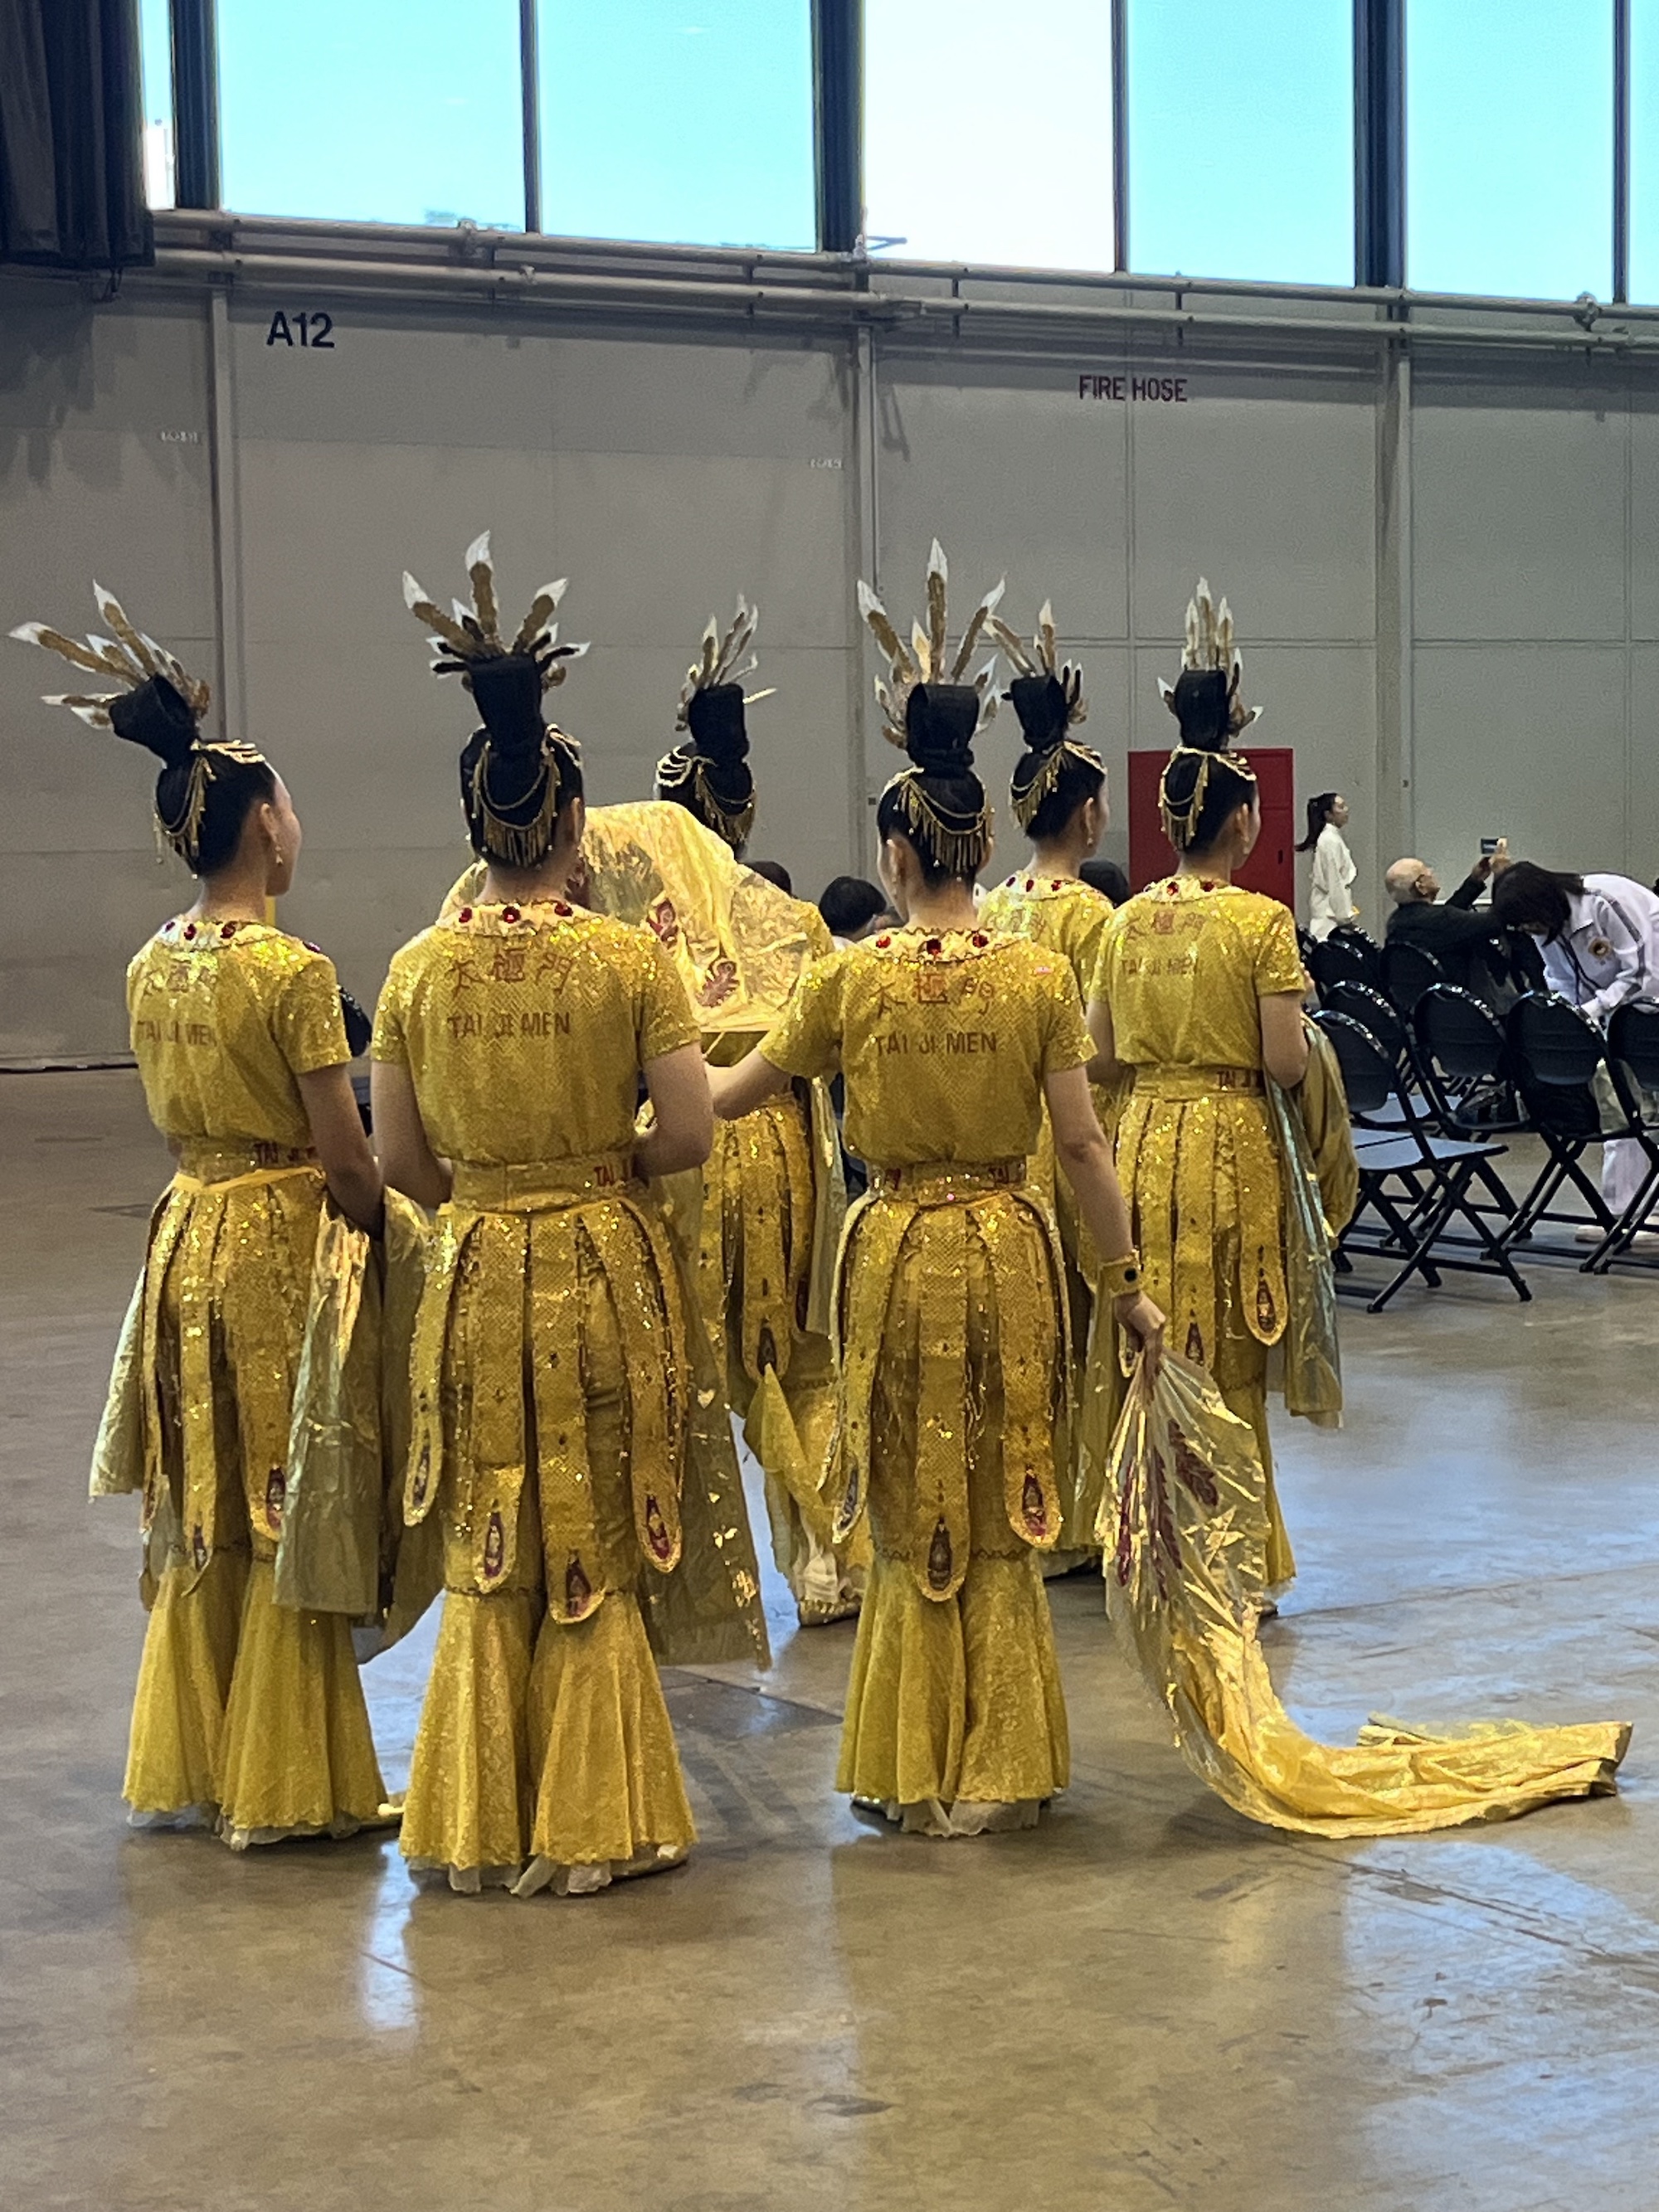 Dancers in gold costumes